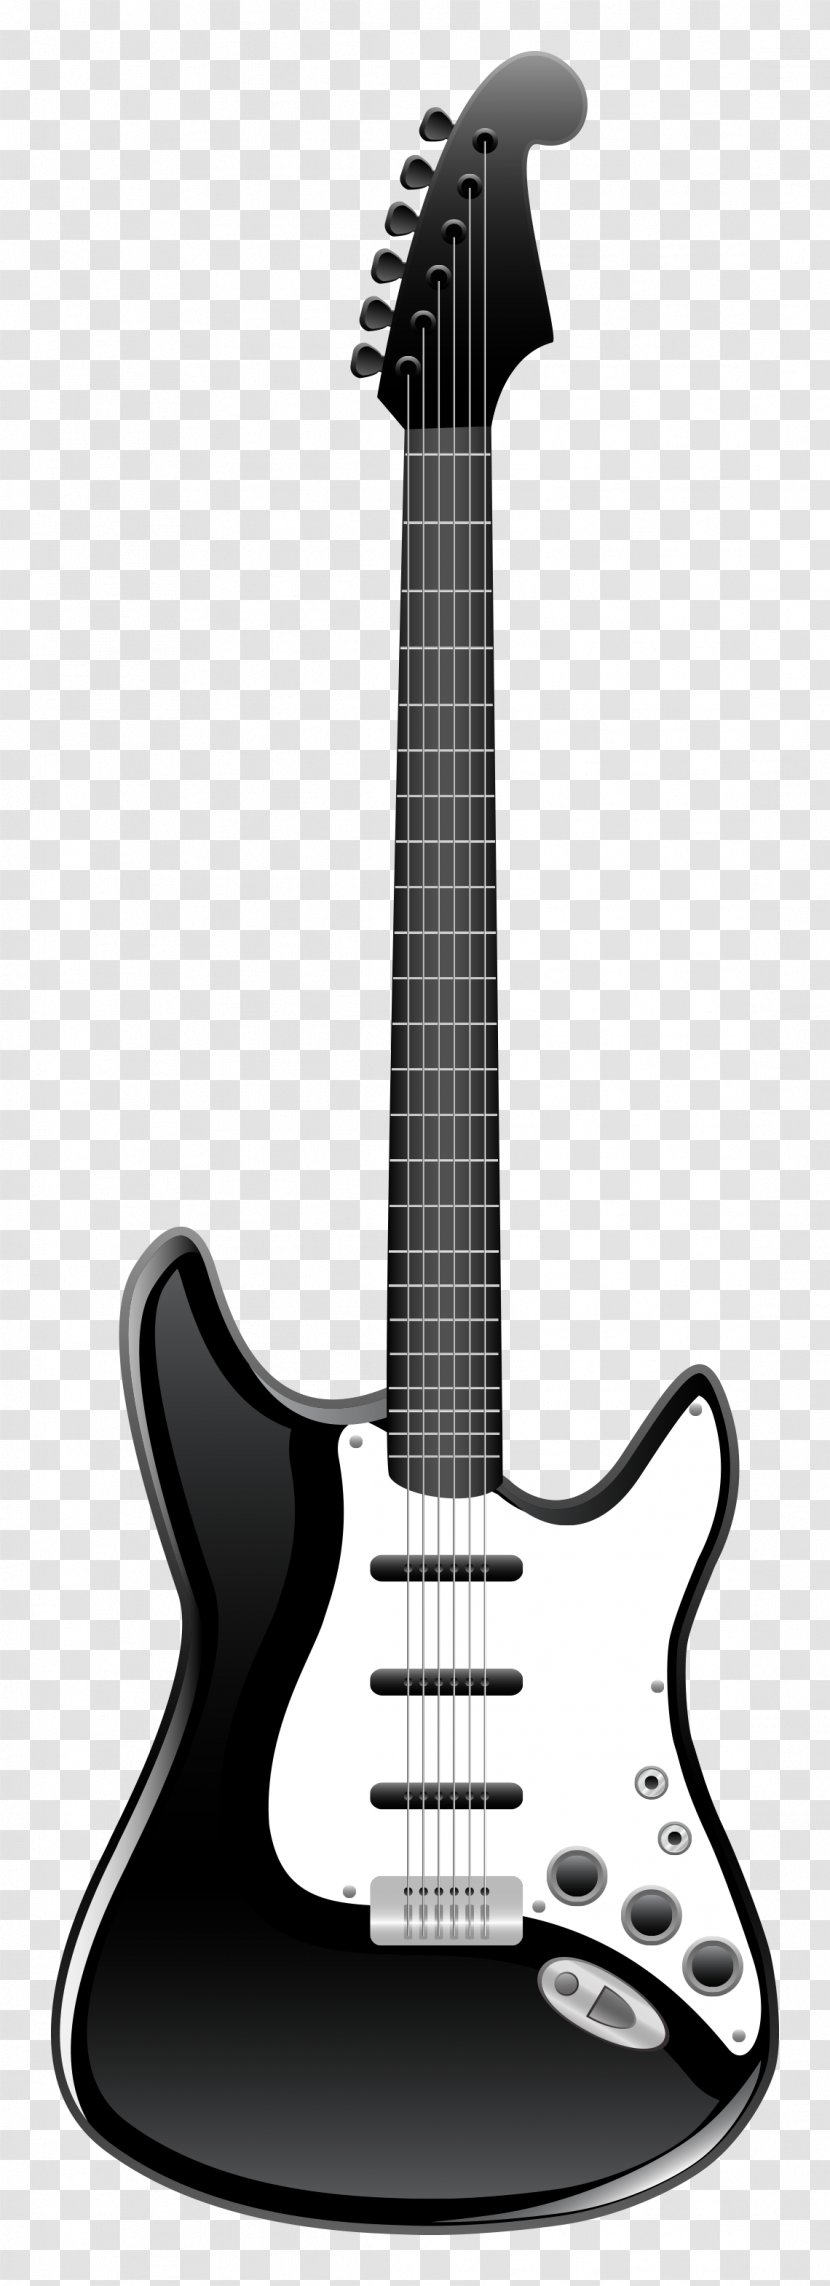 Acoustic Guitar Electric Black And White Clip Art - Heart - Vector Musical Instruments Transparent PNG